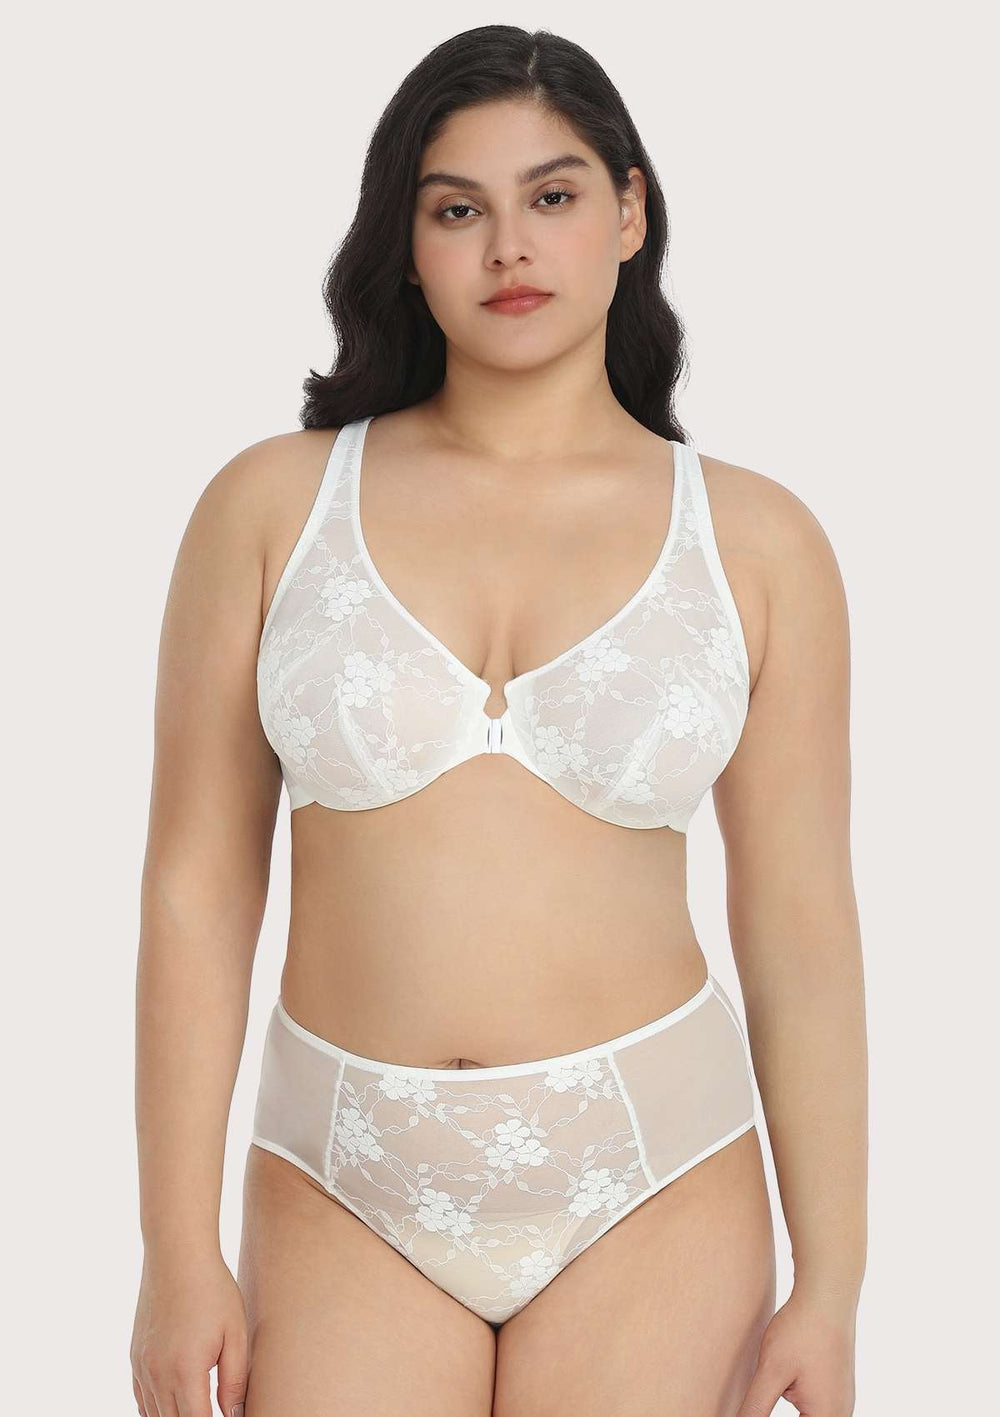 https://www.hsialife.com/cdn/shop/files/hsia-spring-romance-front-close-floral-white-lace-unlined-bra-set-39189130281209.jpg?v=1684996338&width=1000